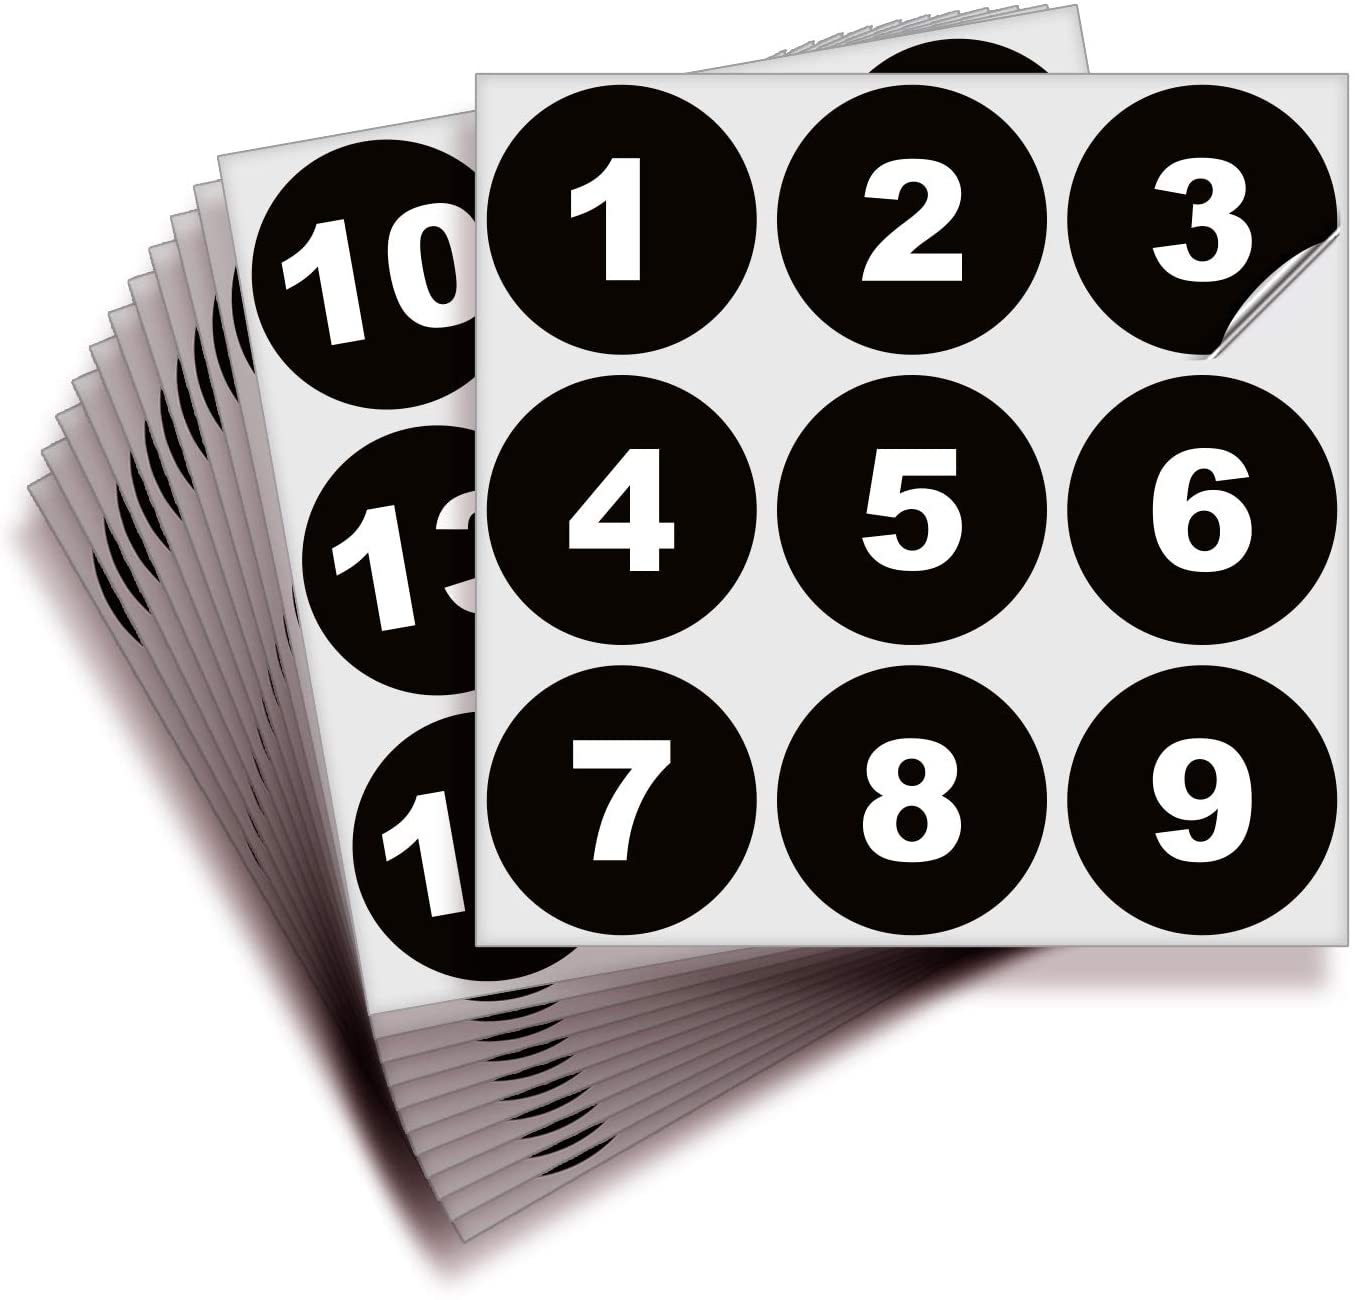 iSYFIX 1-To-100 High Contrast Vinyl Number Labels